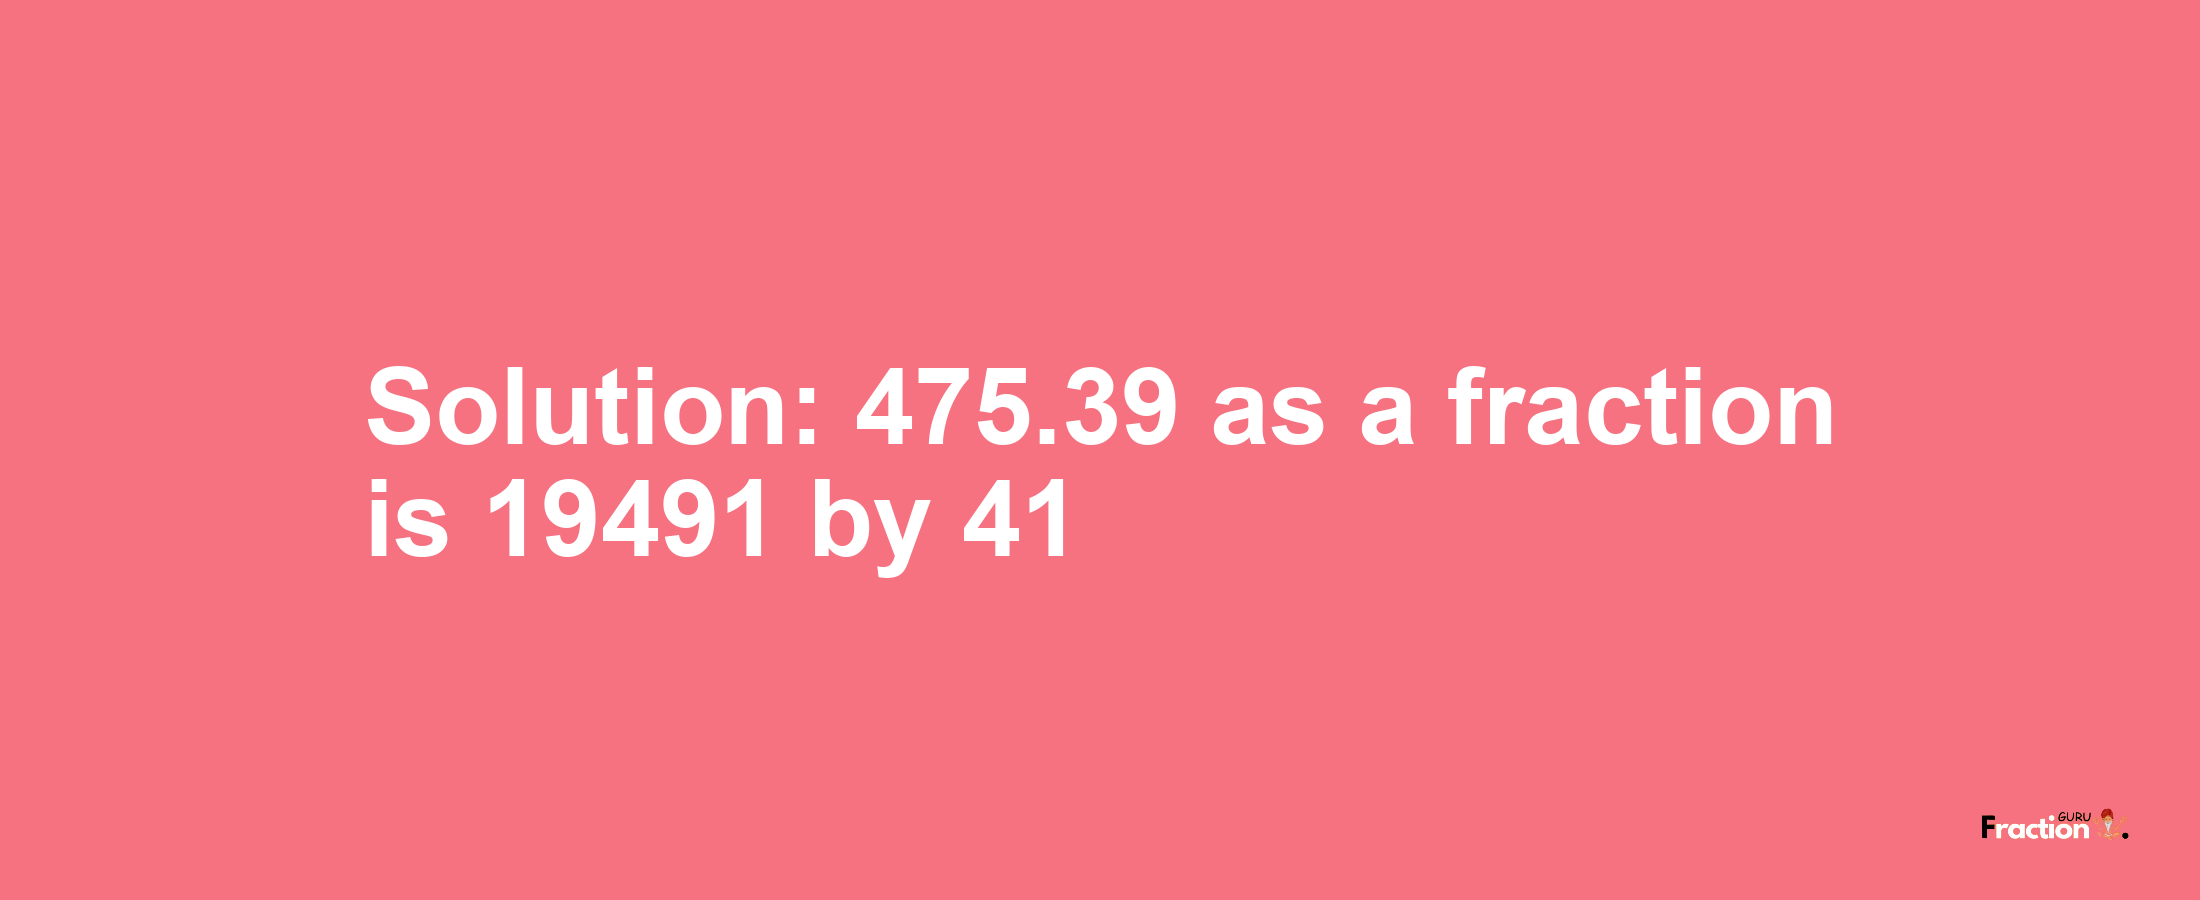 Solution:475.39 as a fraction is 19491/41